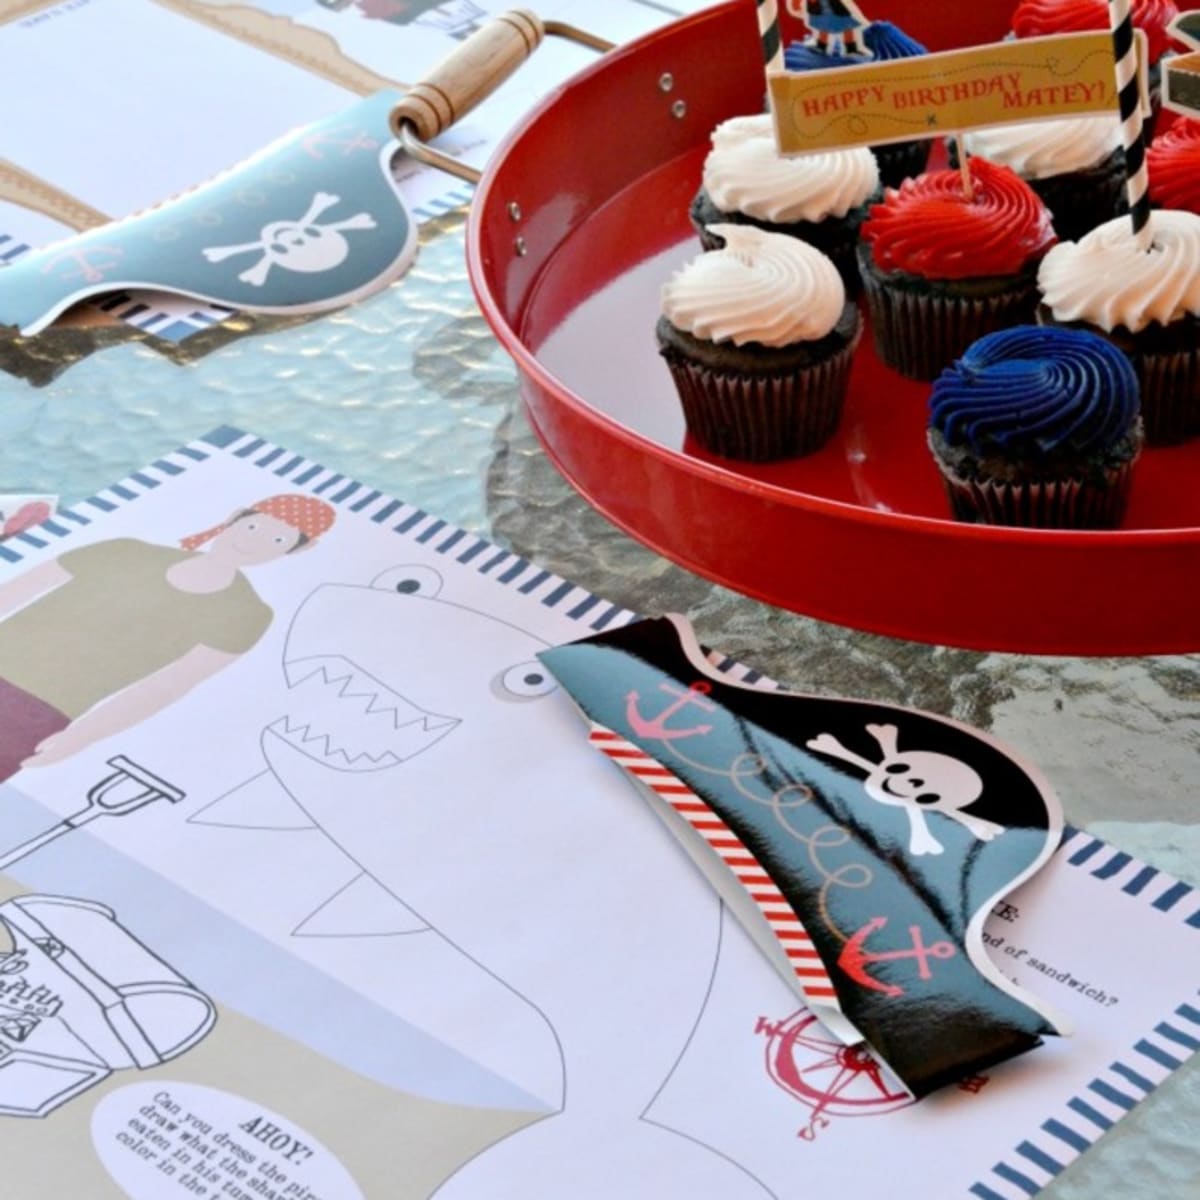 Plan a Pirate Birthday Party - MomTrends